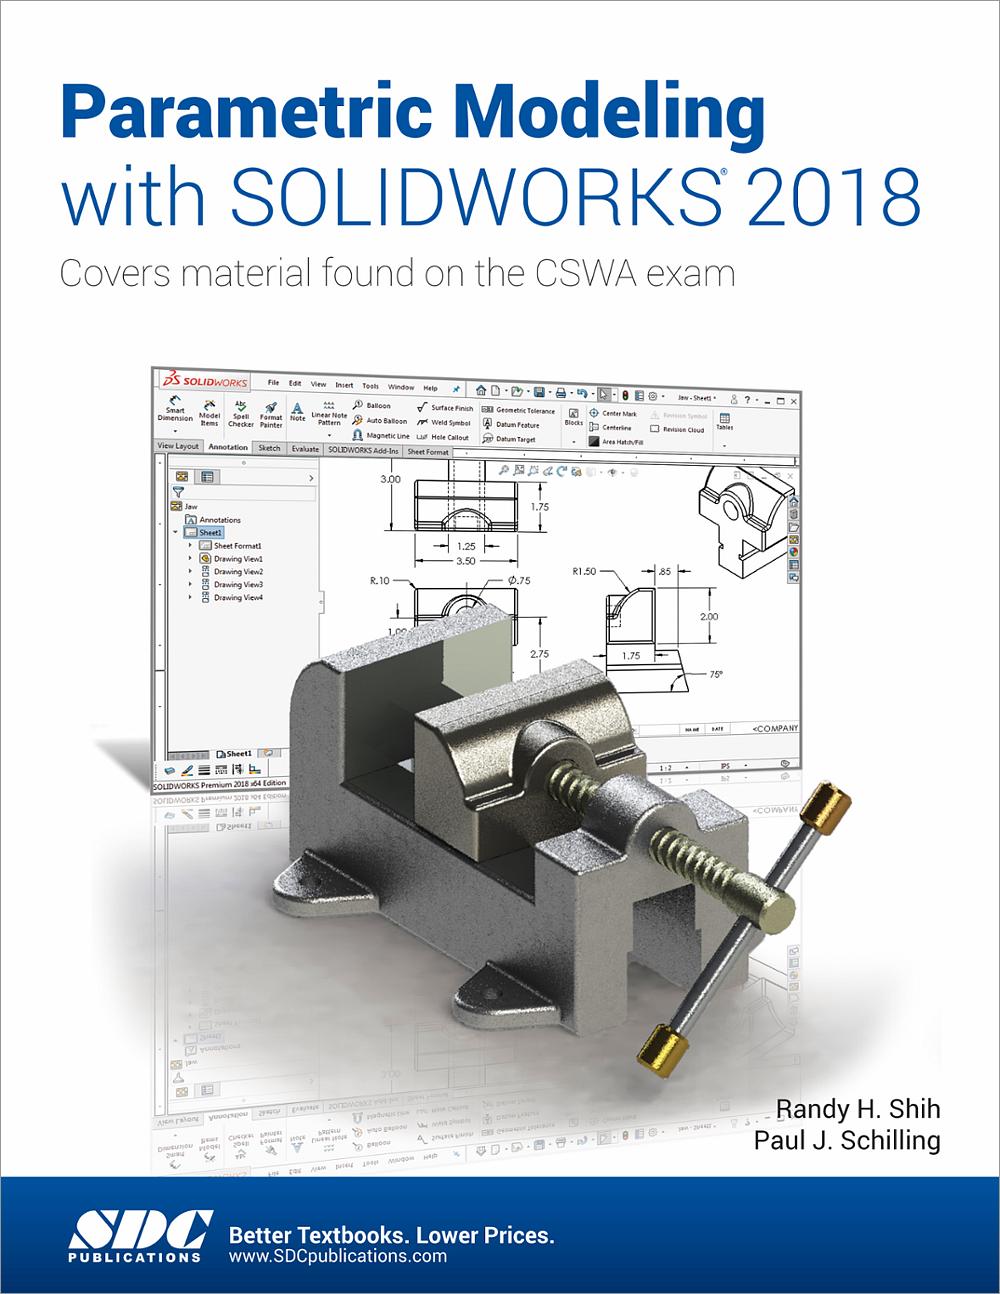 parametric modeling with solidworks 2011 by pdf download